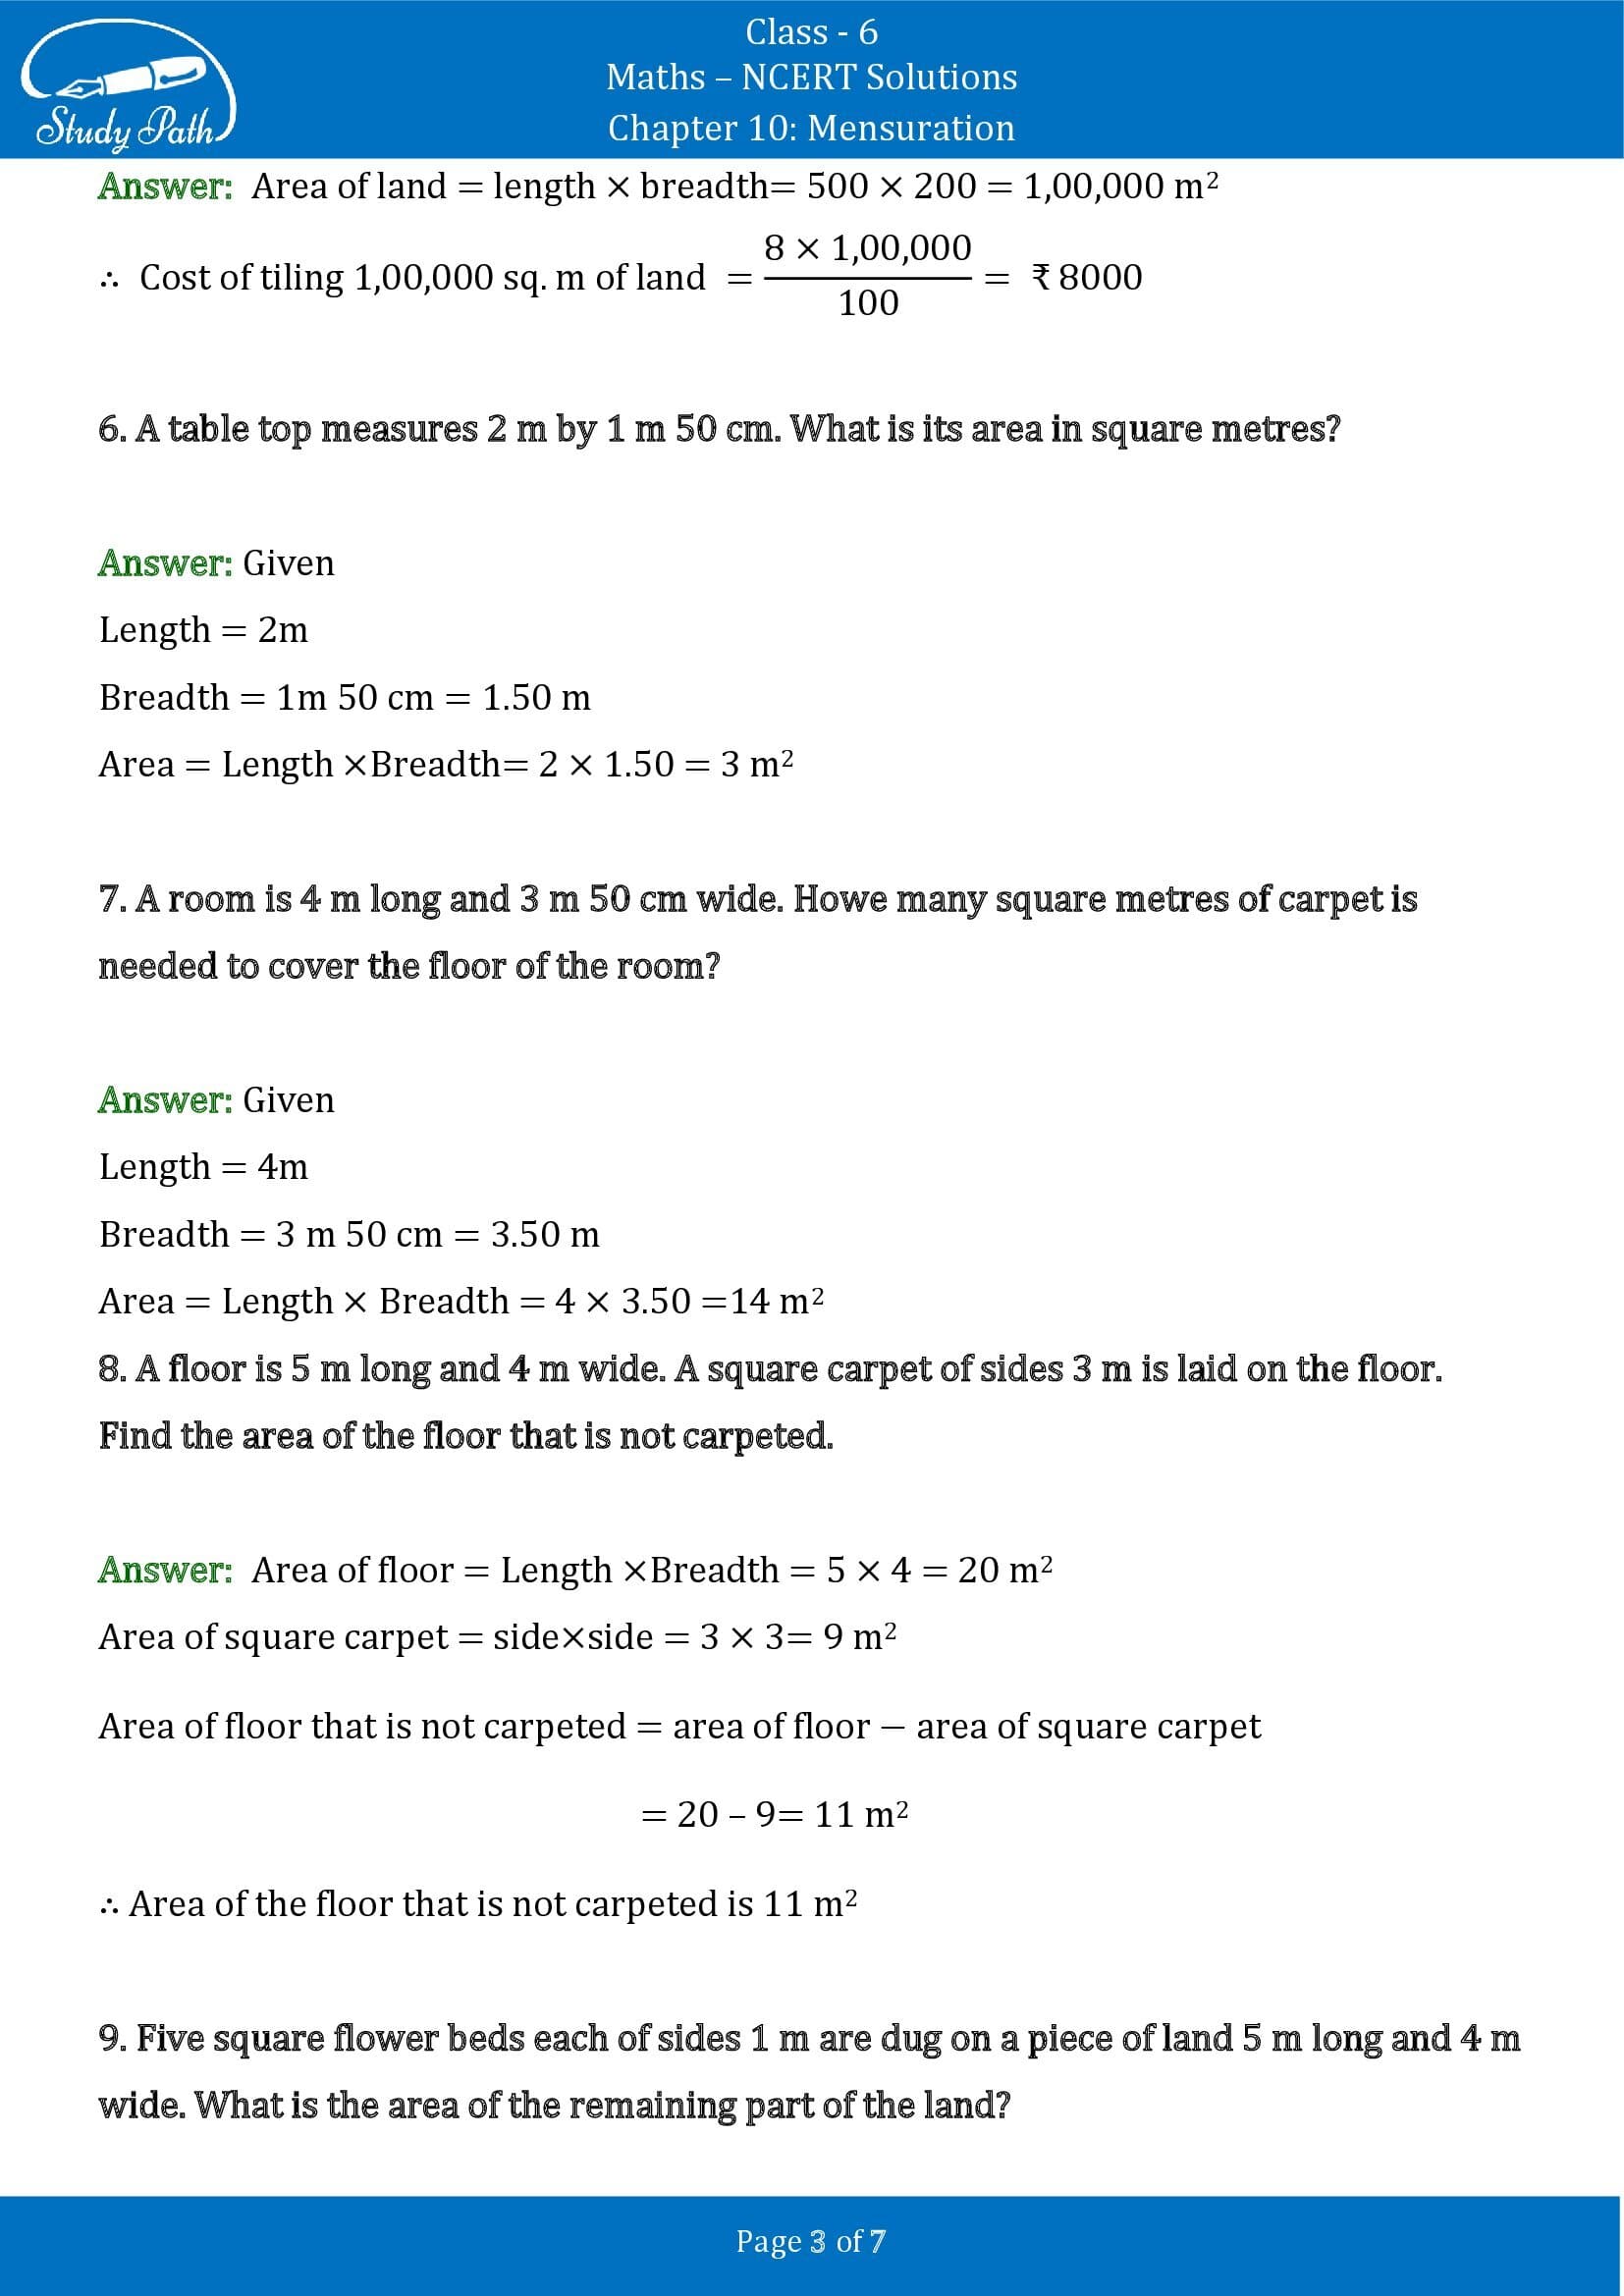 NCERT Solutions for Class 6 Maths Chapter 10 Mensuration Exercise 10.3 00003